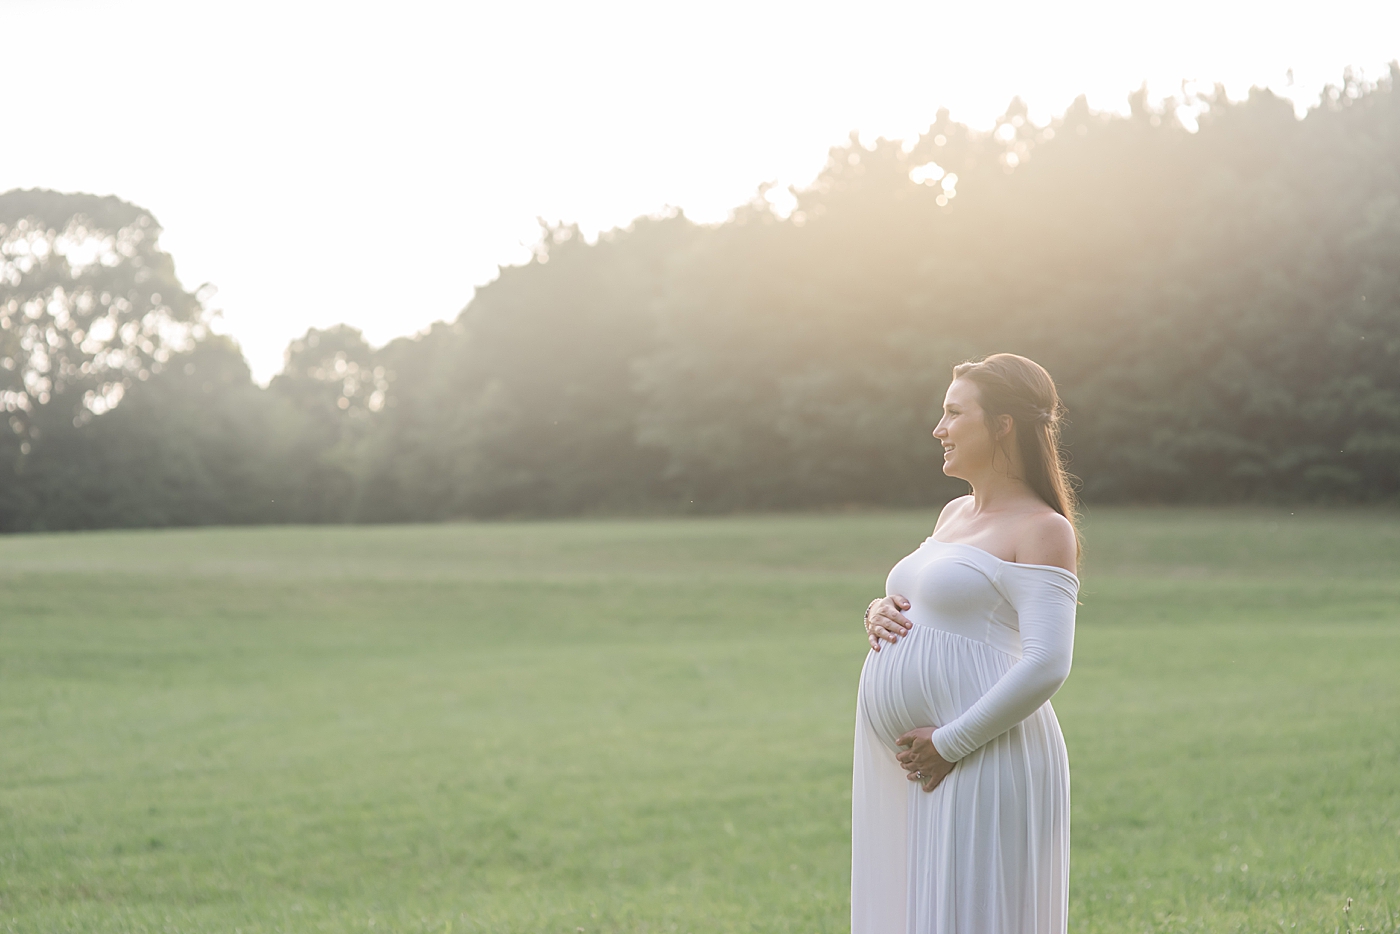 Mom to be in flowing white dress smiling | Photo by Denver NC Maternity Photographer Anna Wisjo